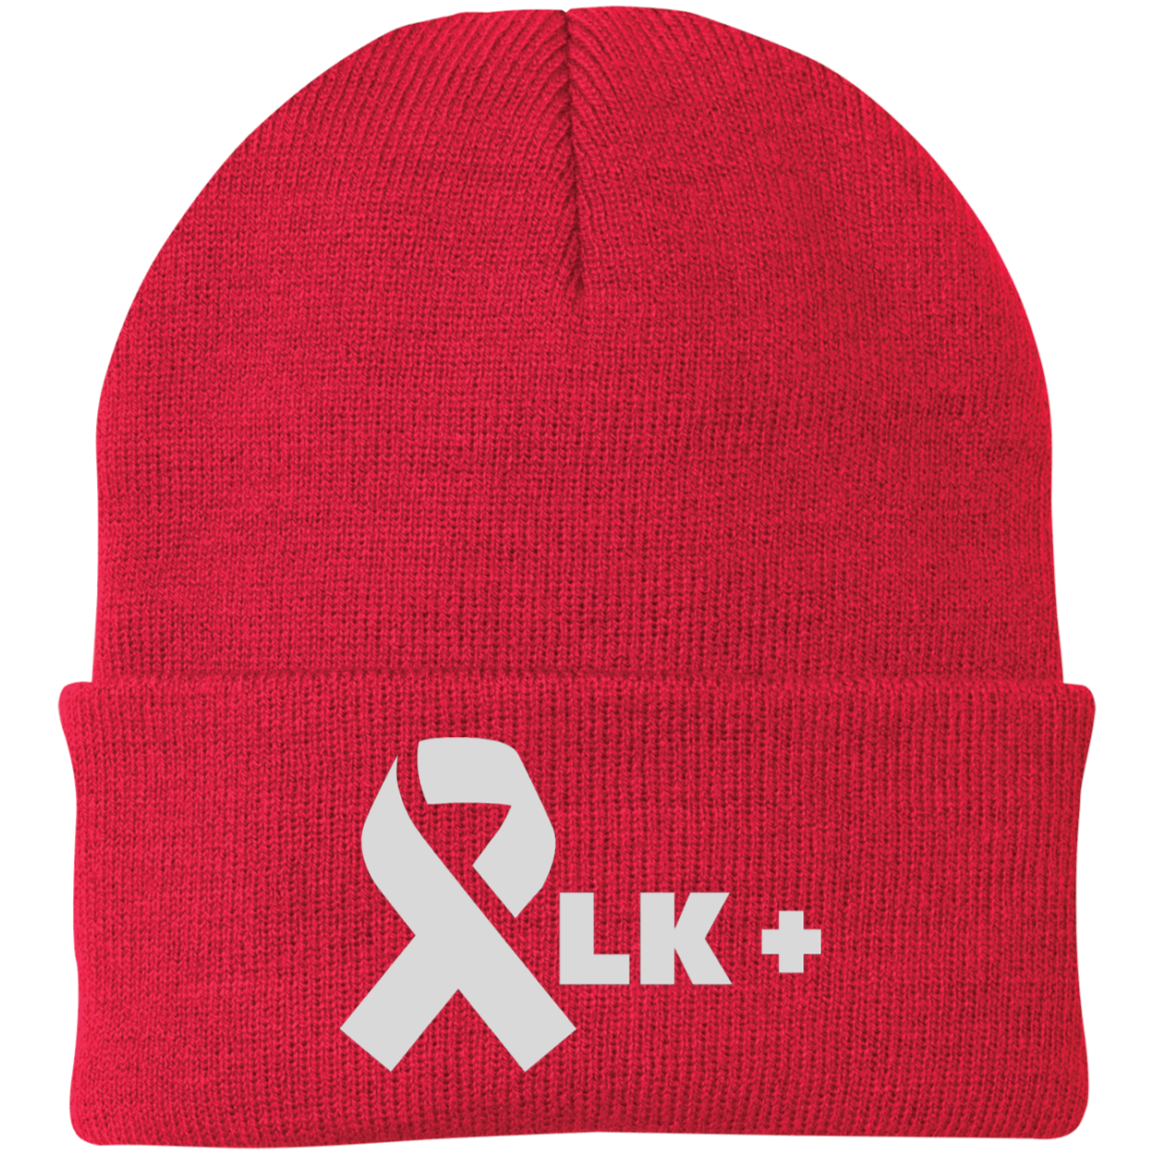 ALK Embroidered Knit Cap